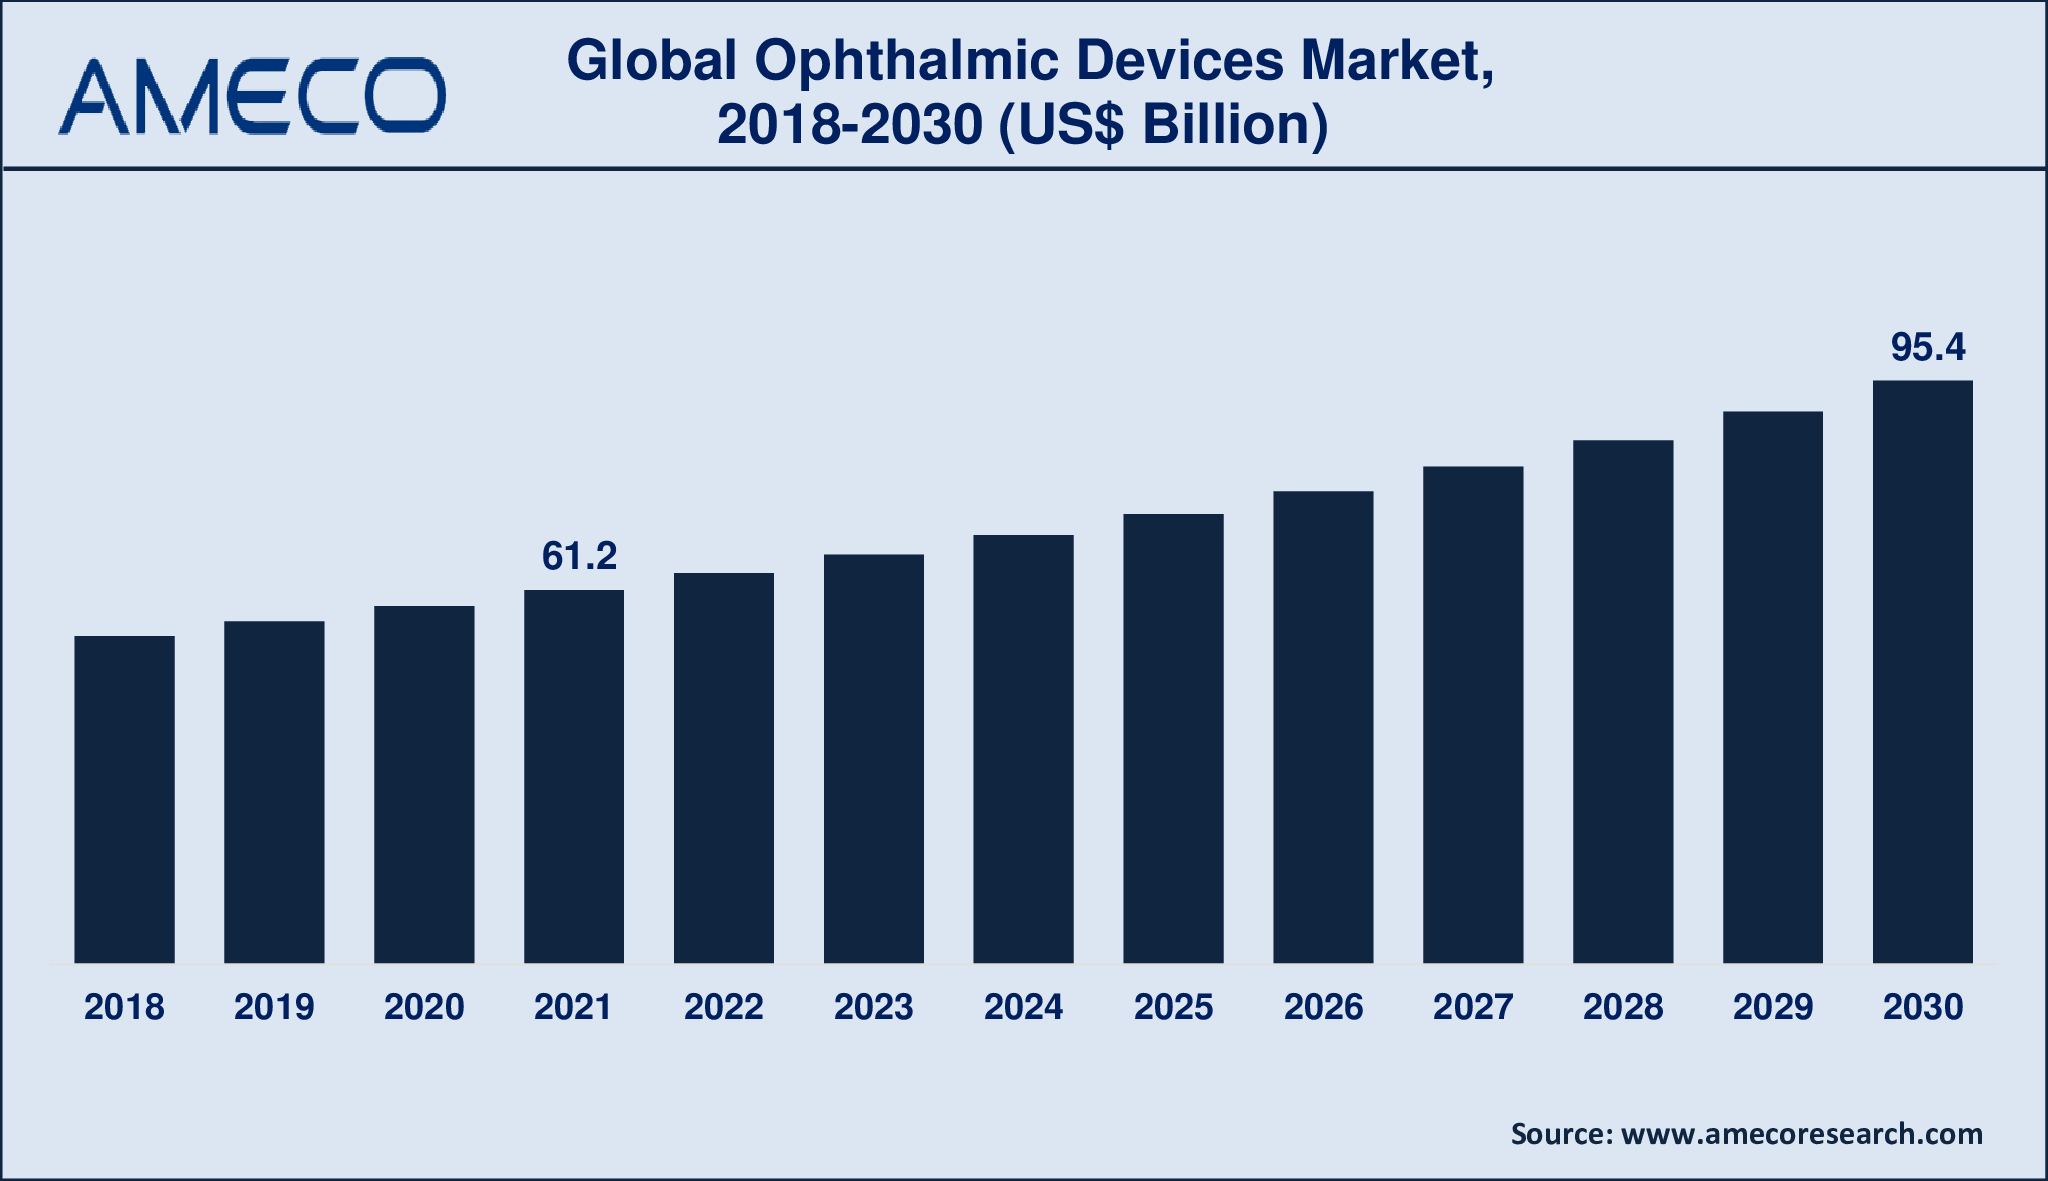 Ophthalmic Devices Market Dynamics